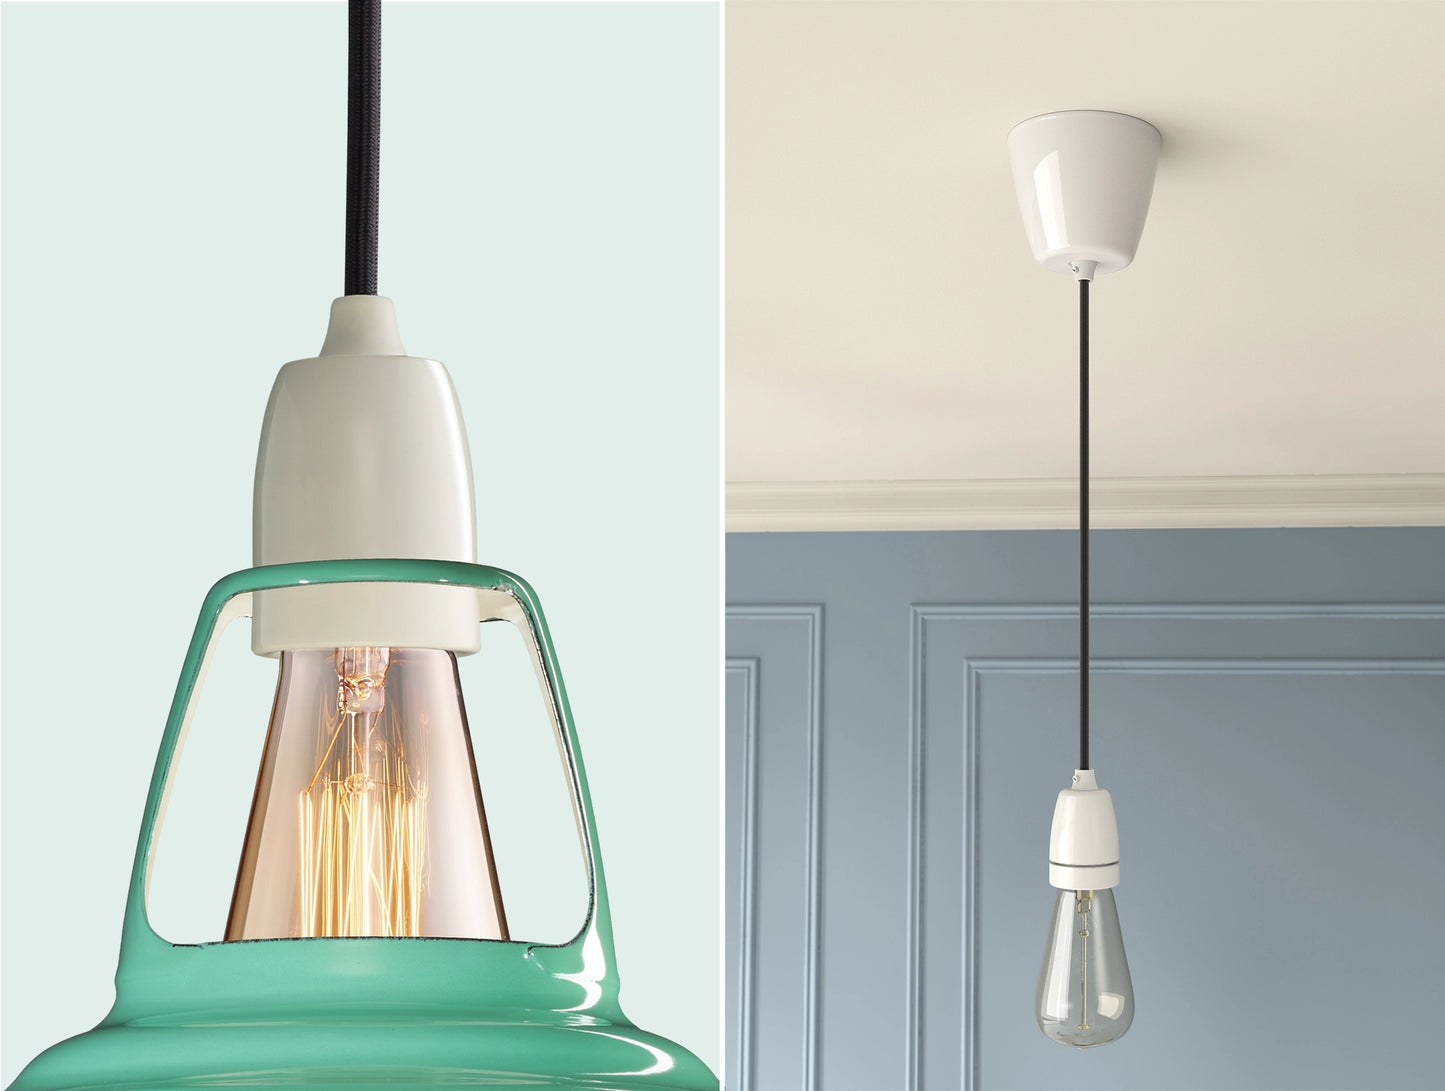 Close up of an E27 Porcelain suspension set on a Fresh Teal lampshade on the left. On the right, an E27 Porcelain pendant set with a lightbulb is hanging from the ceiling